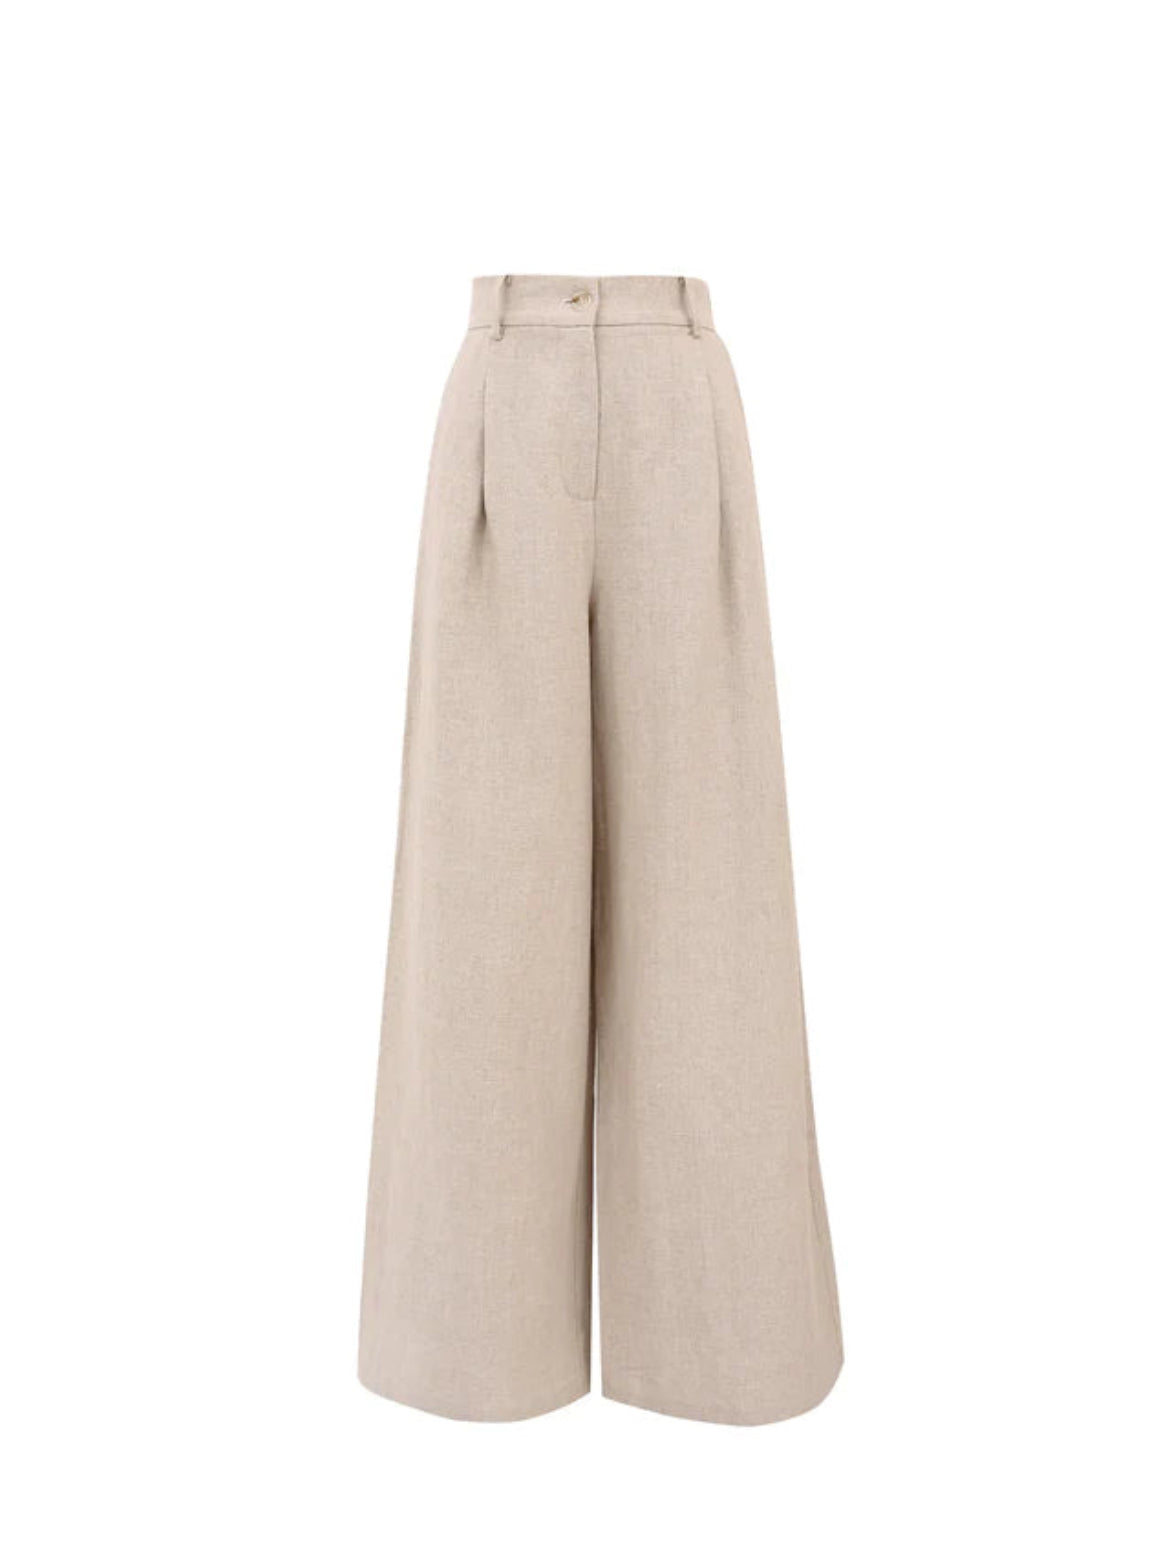 Philo pants by FRNCH